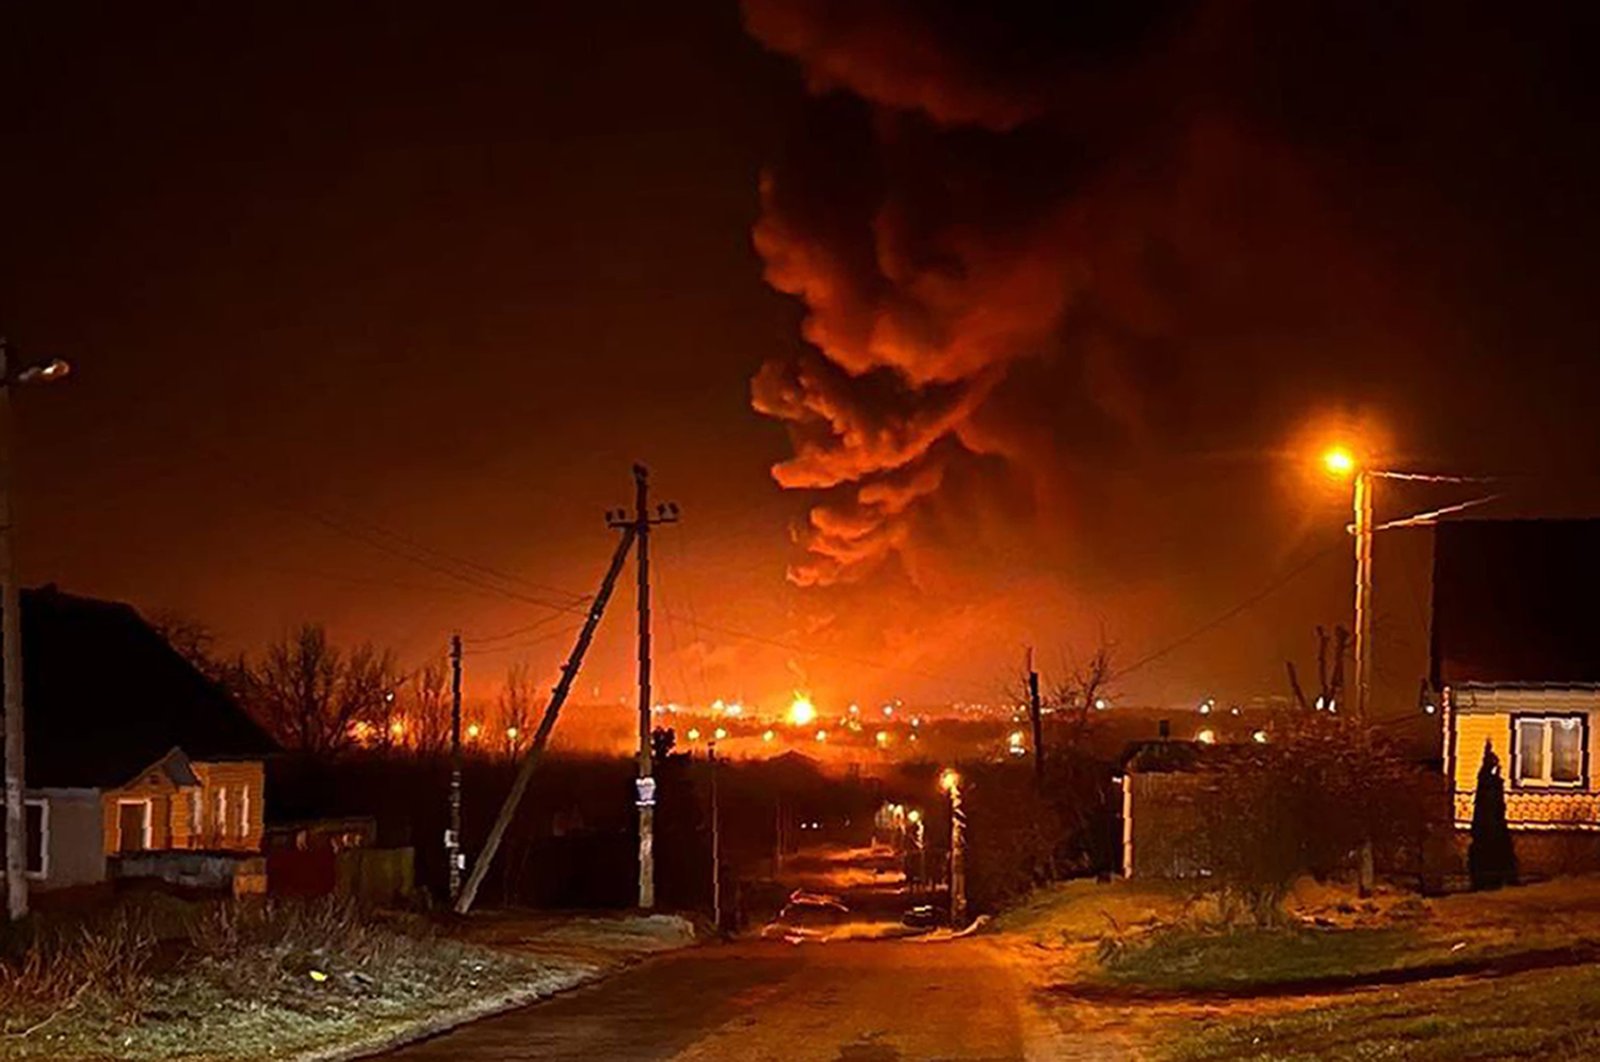 Smoke and flames rise from oil storage facilities in Bryansk, Russia, April 25, 2022. (AP Photo)